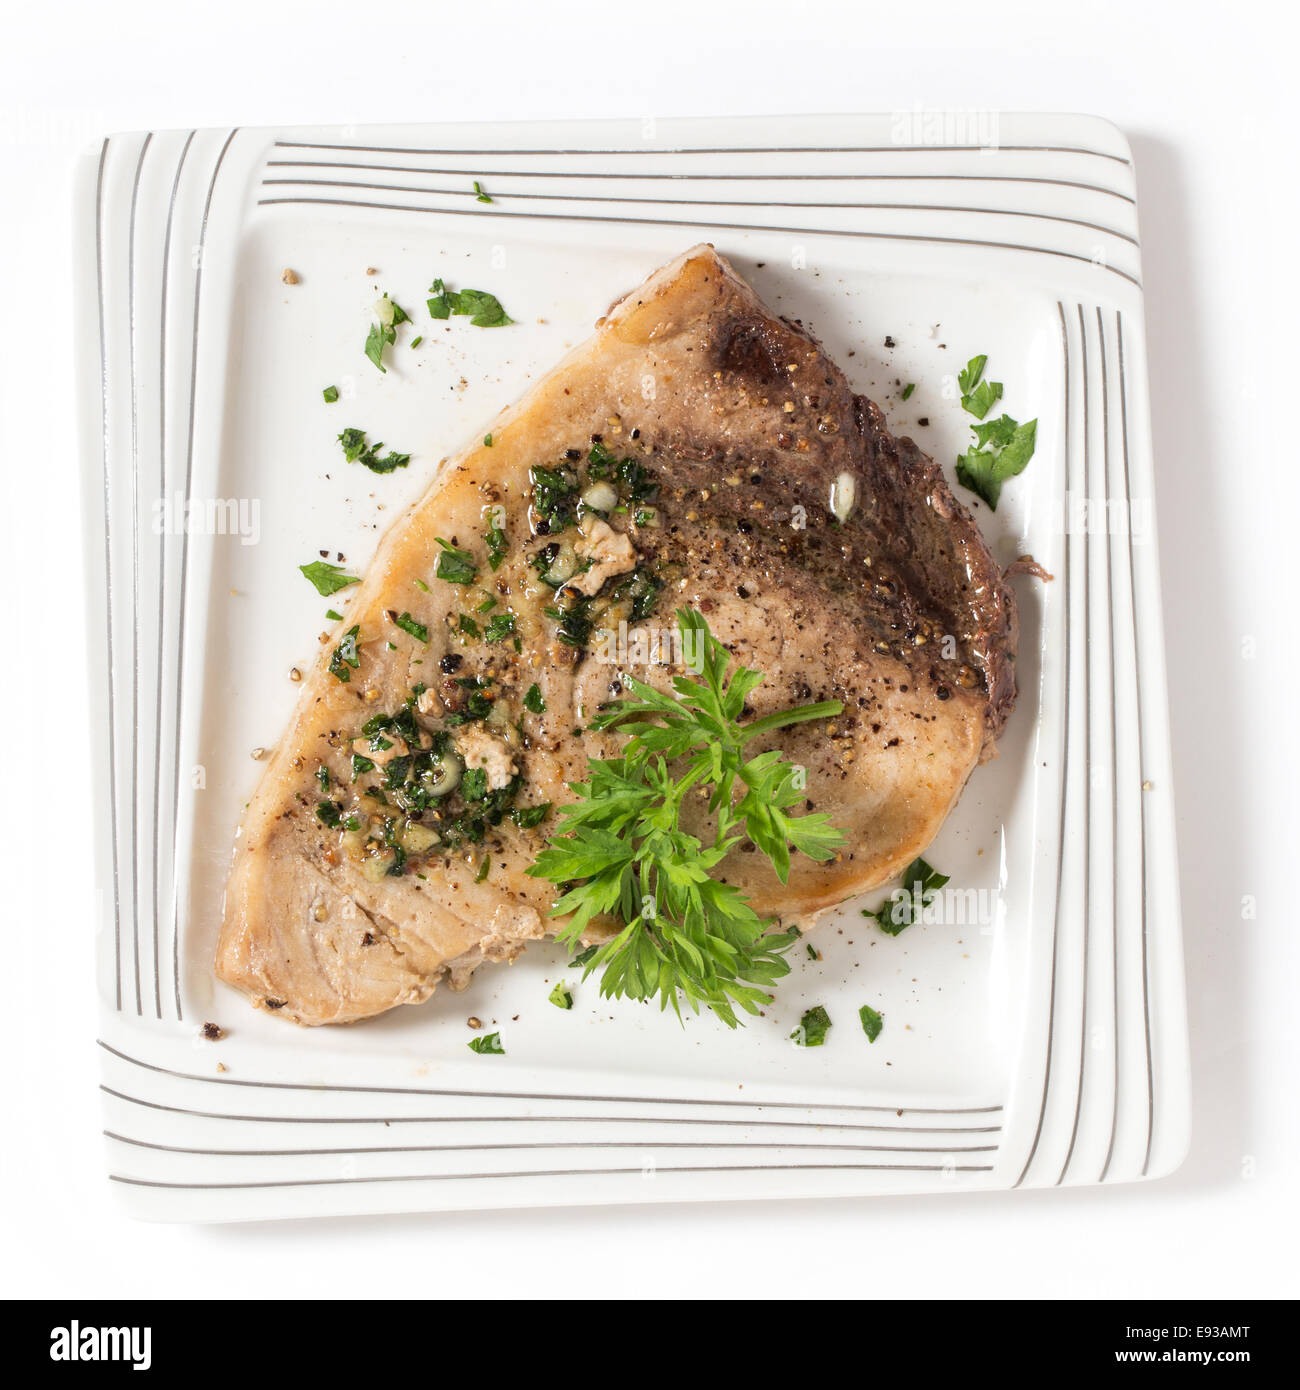 Cooked peppered swordfish steak with a parsley and garlic butter sauce on a plate viewed from above Stock Photo